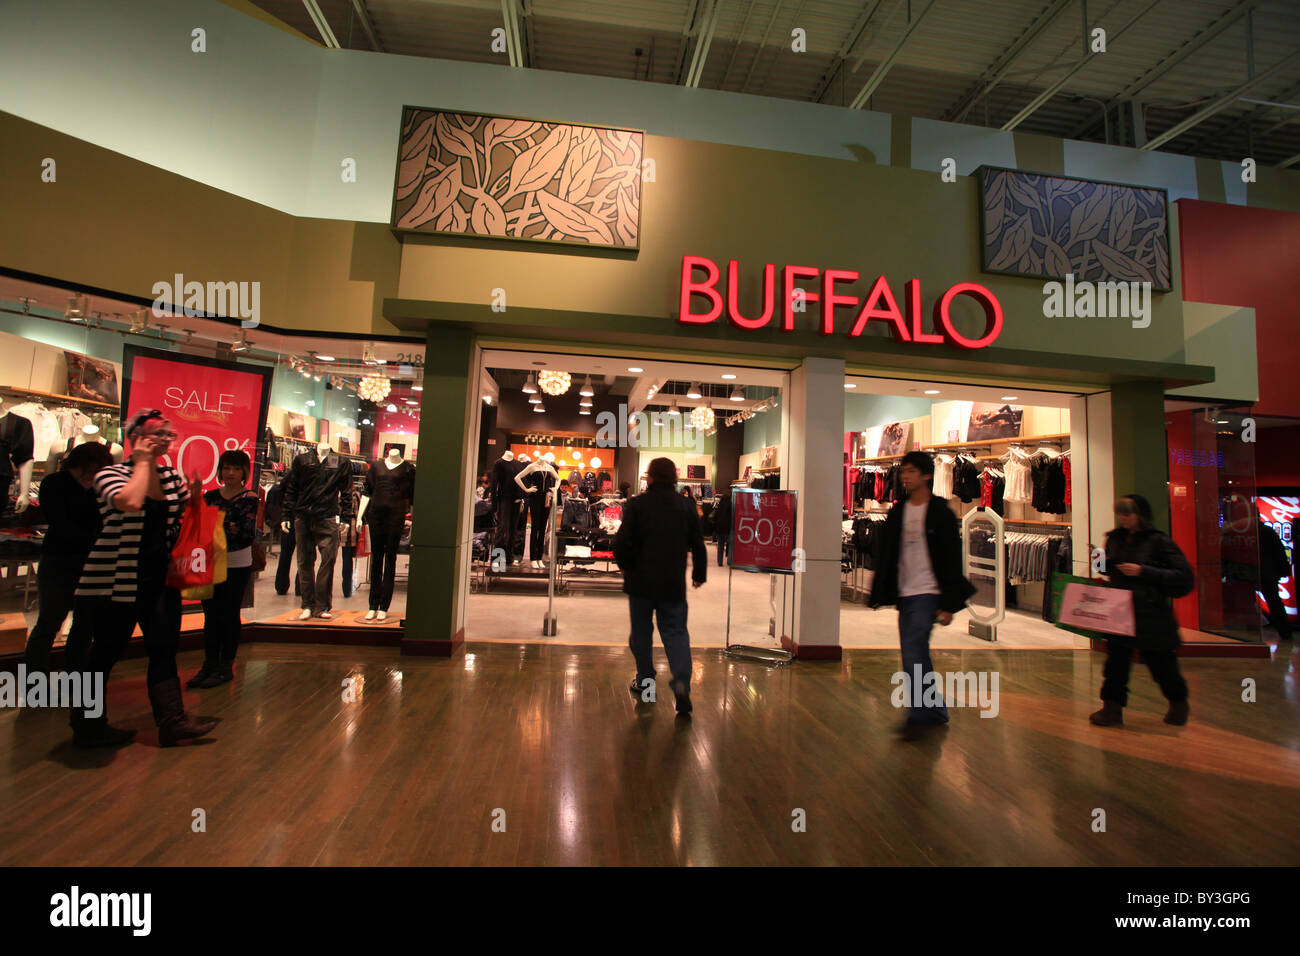 Buffalo clothing outlet store in Vaughan Mills Mall in Toronto Stock Photo  - Alamy